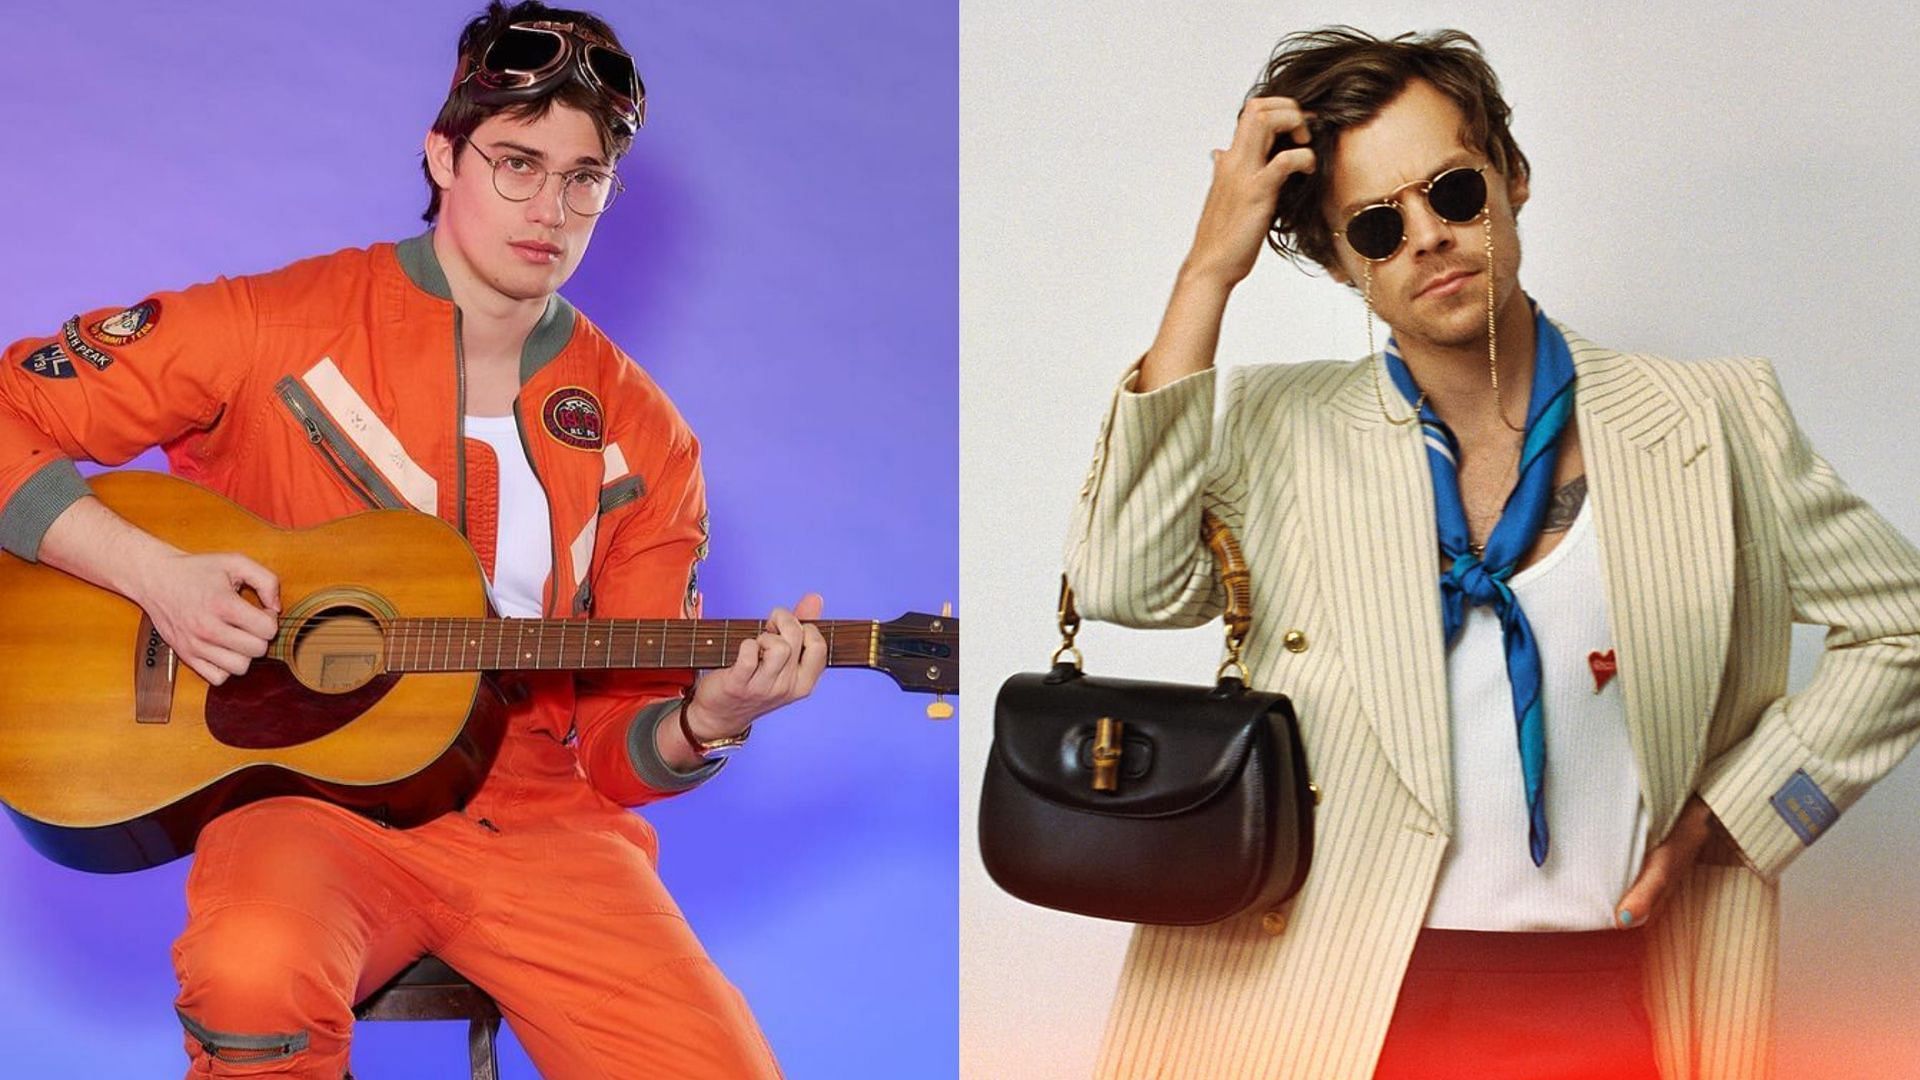 Nicholas Galitzine&#039;s recent character has been inspired from Styles (Image via Instagram / @nicholasgalitzine / Facebook / Harry Styles)